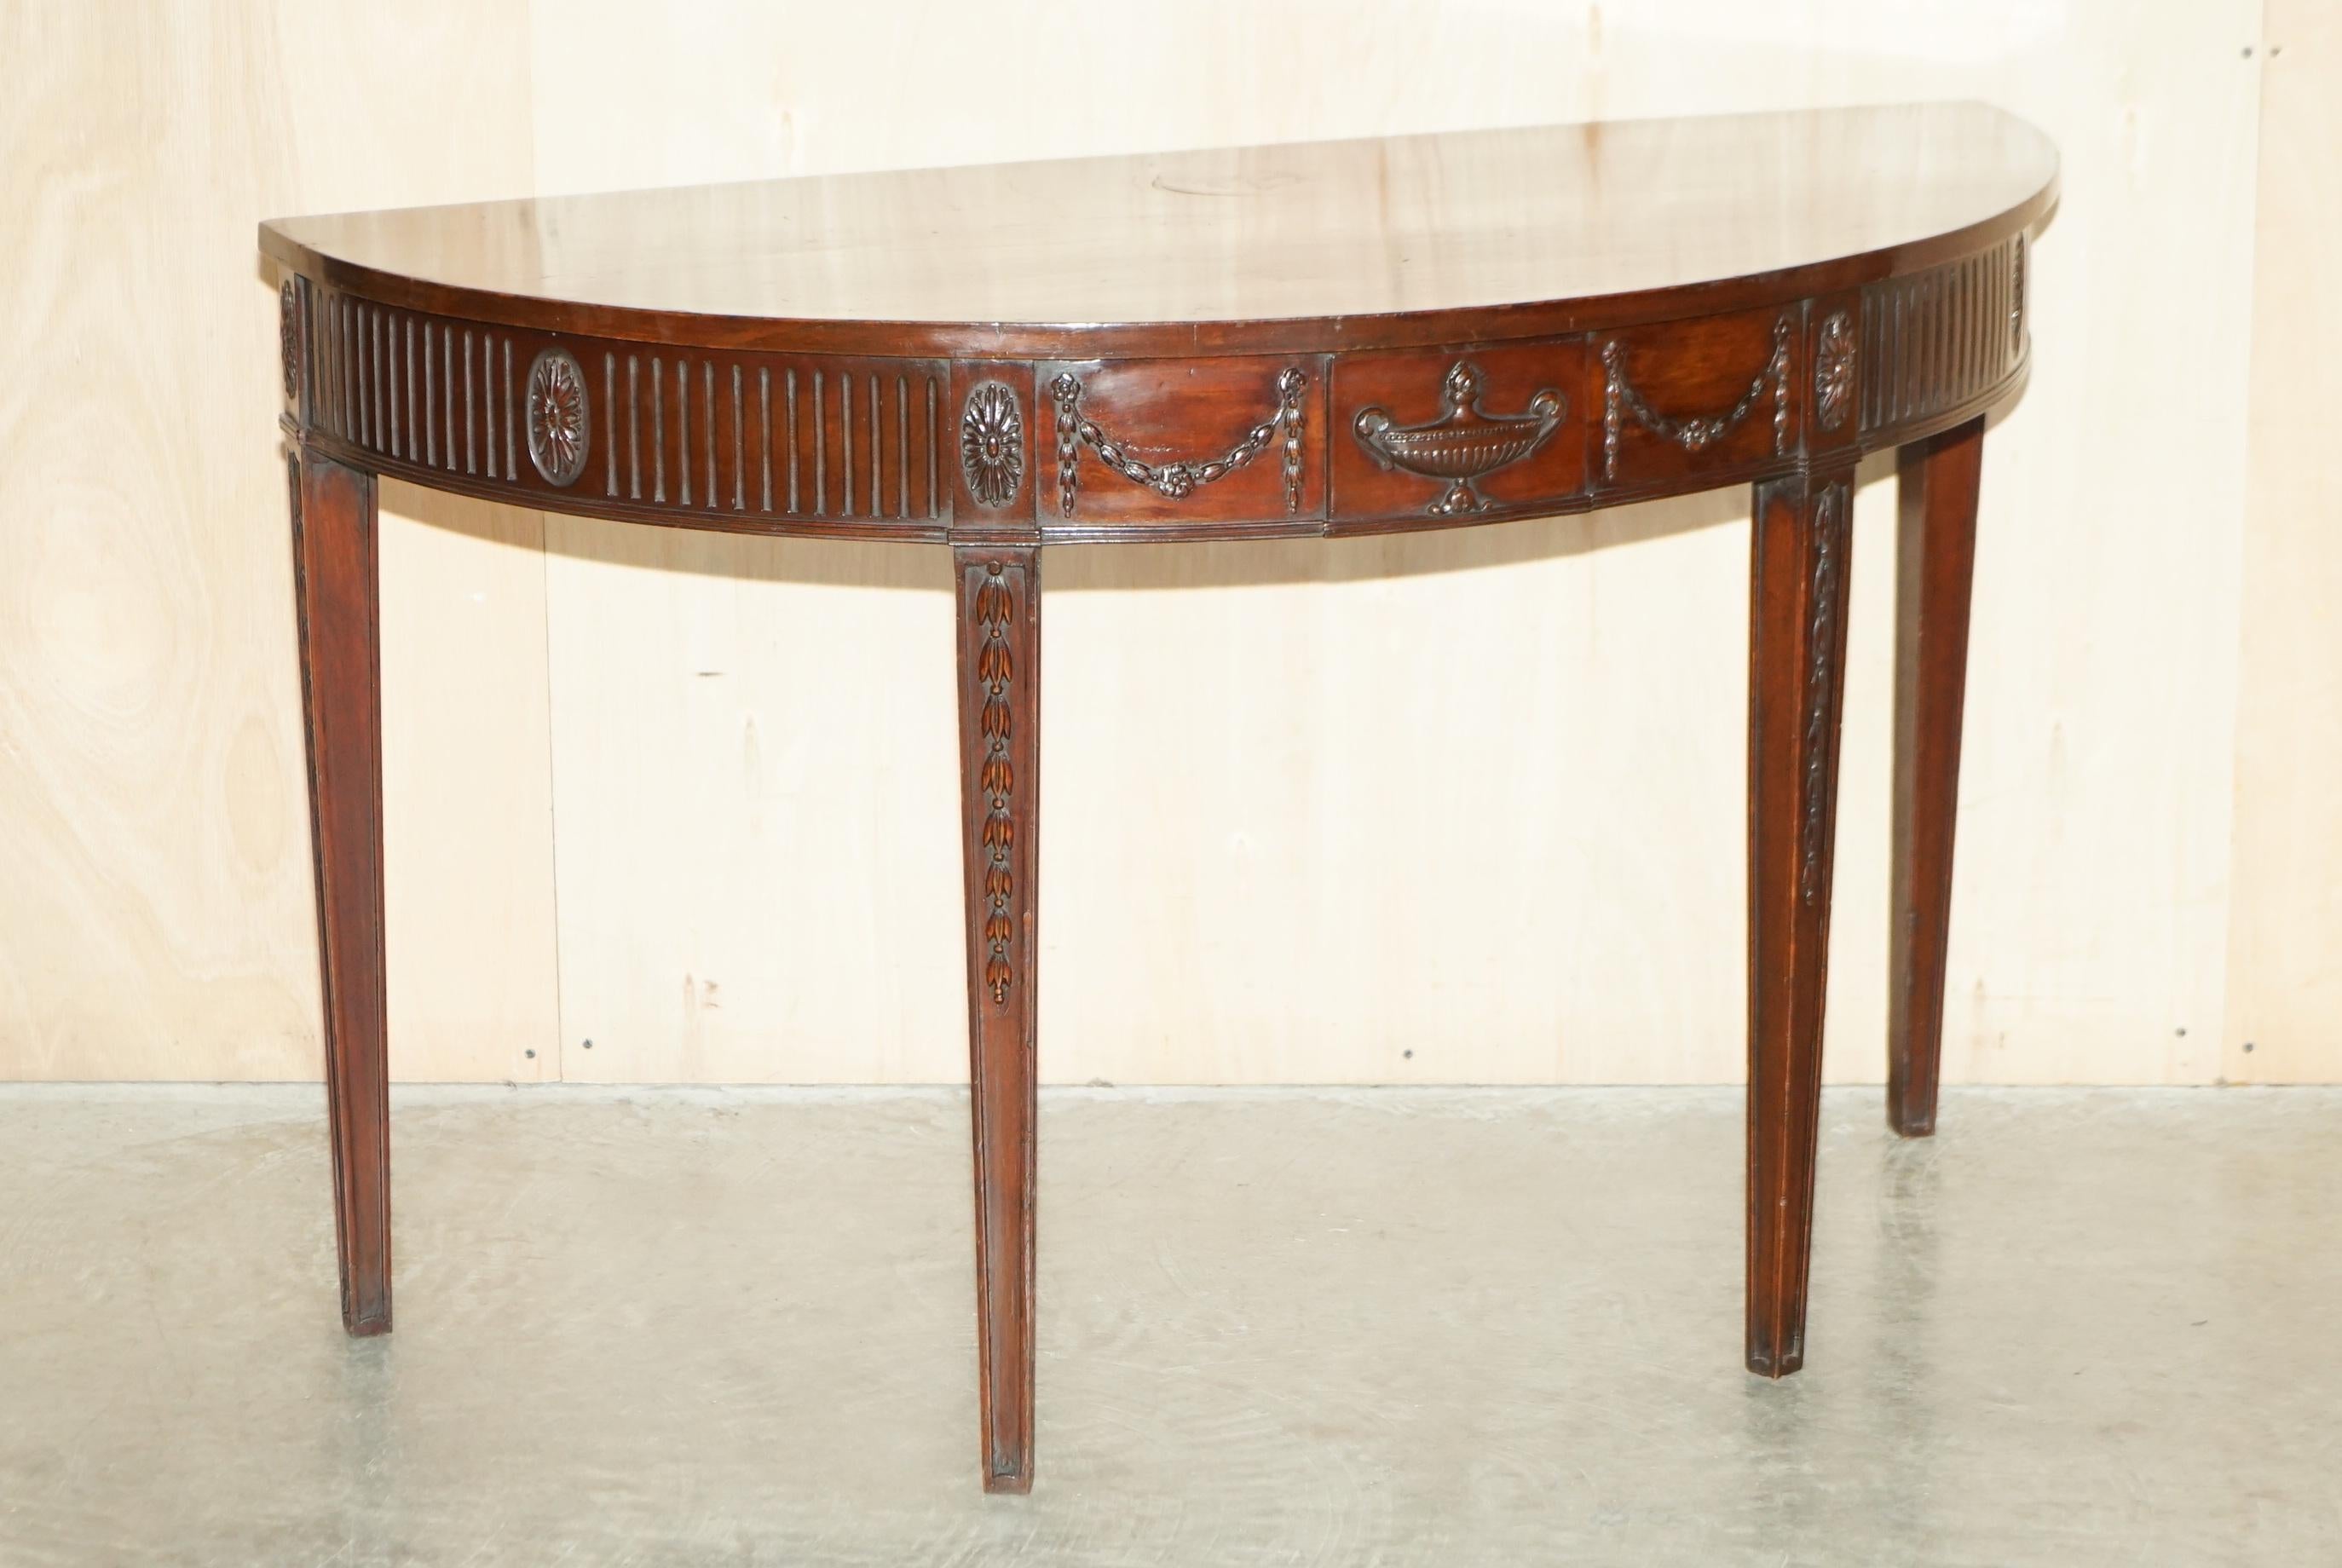 Royal House Antiques

Royal House Antiques is delighted to offer for sale this rare and important Adams style 18th century hand carved and fully restored demi lune console table with solid slab top burl mahogany top

Please note the delivery fee